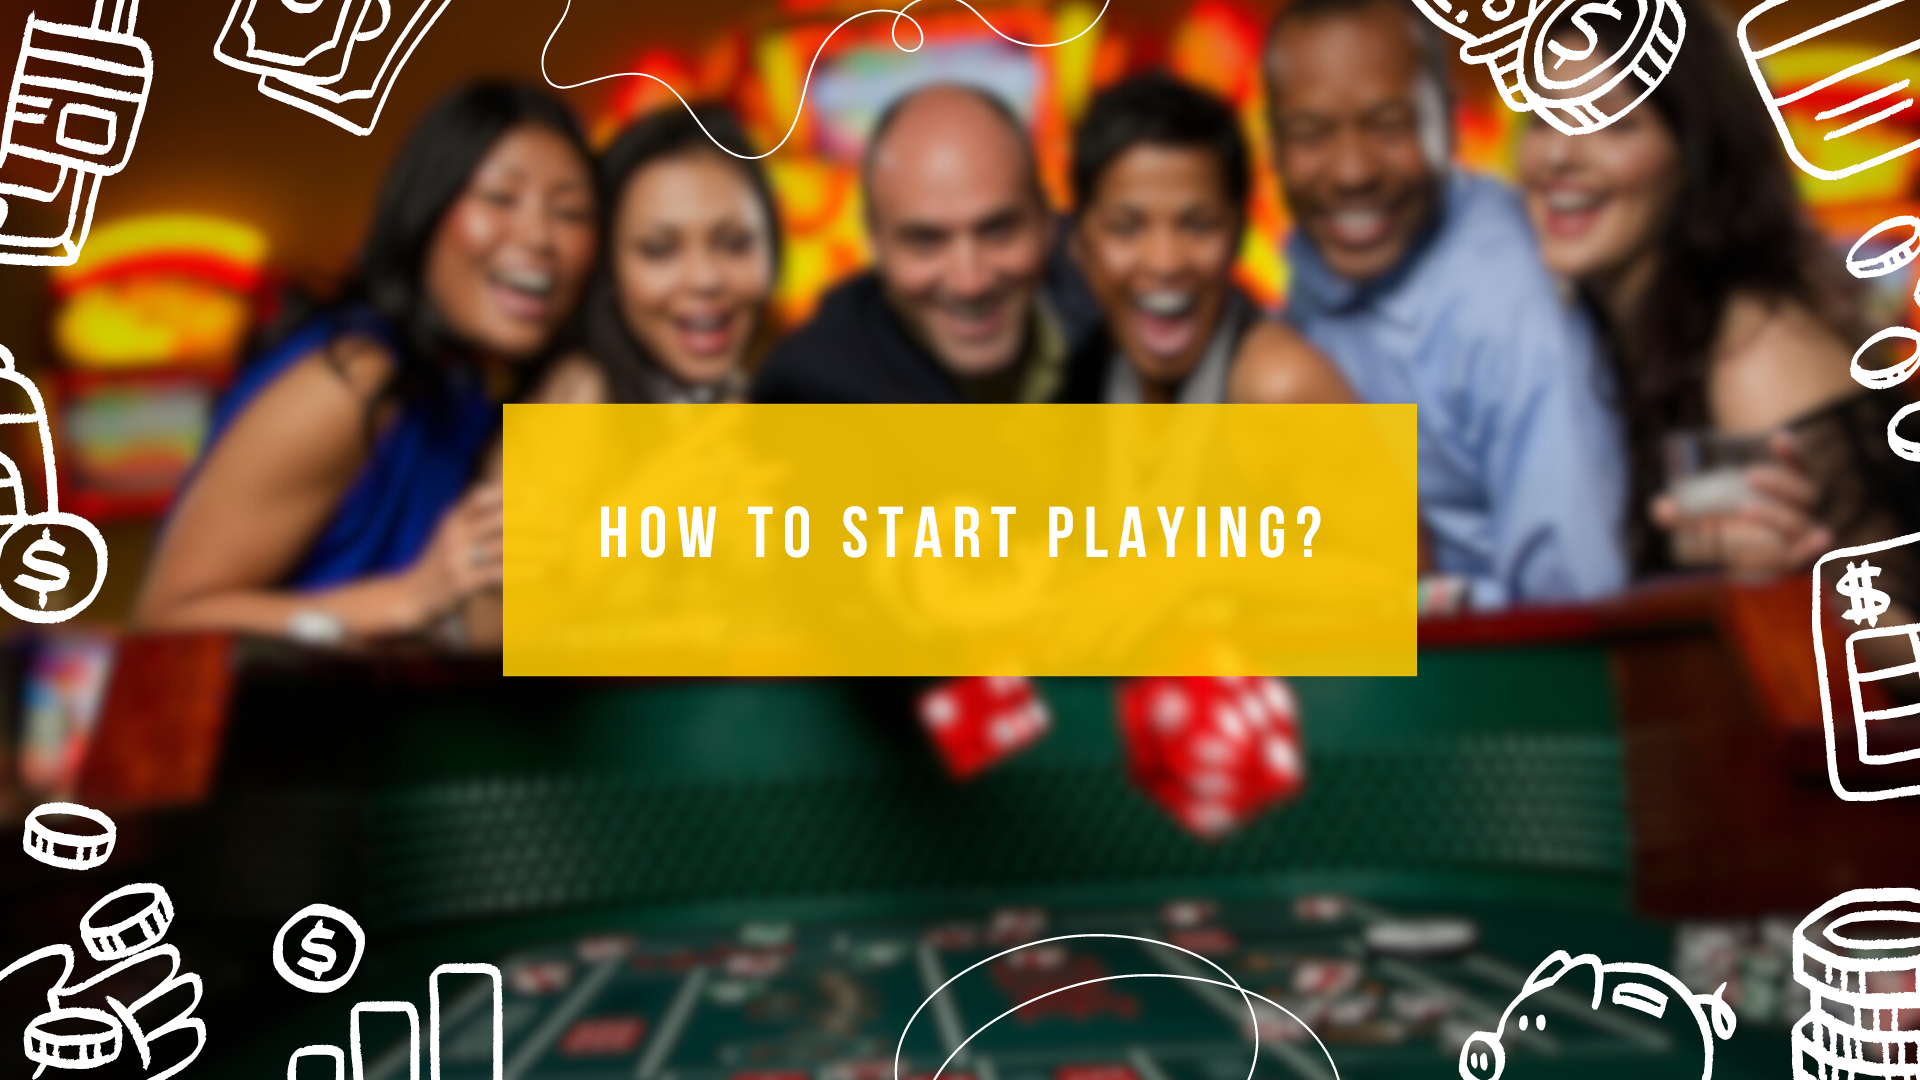 How to Start Playing?